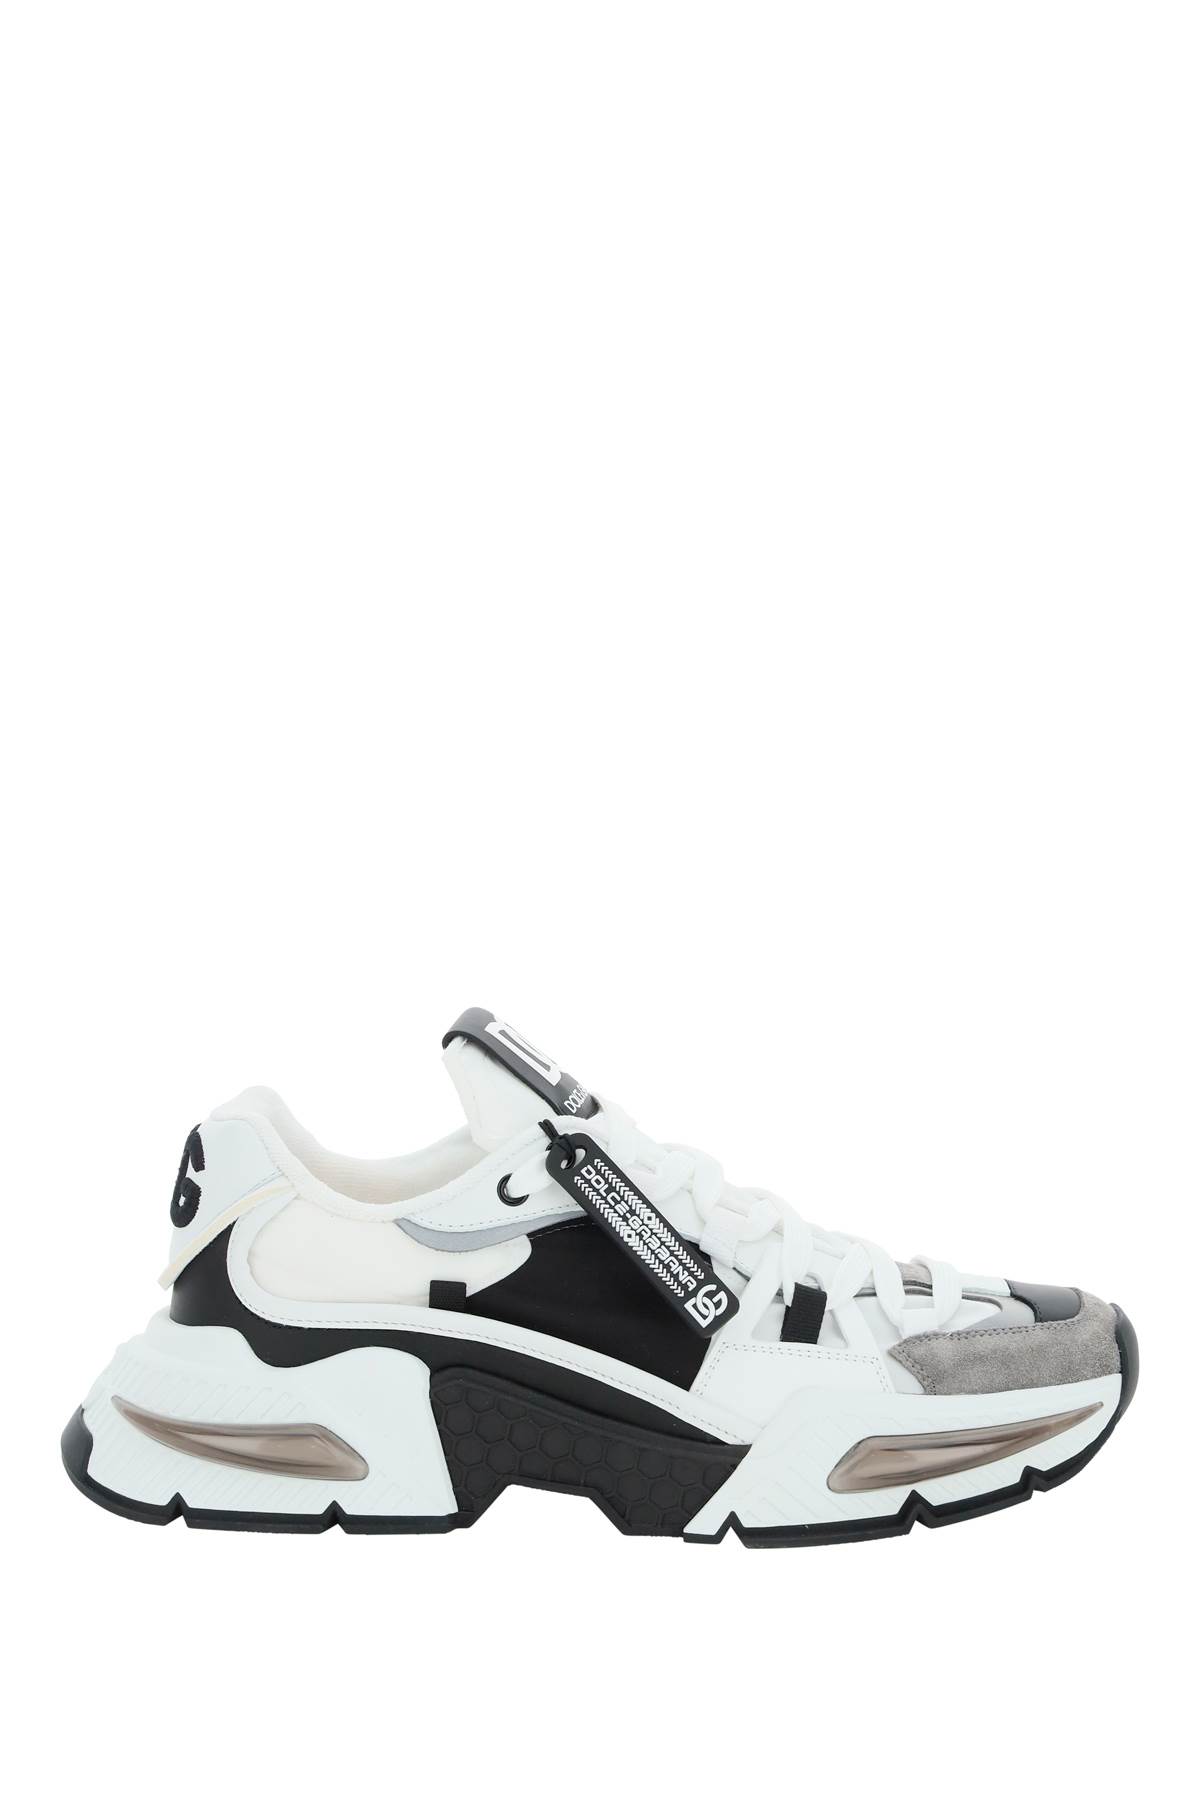 Dolce & Gabbana Air Master Sneakers In White